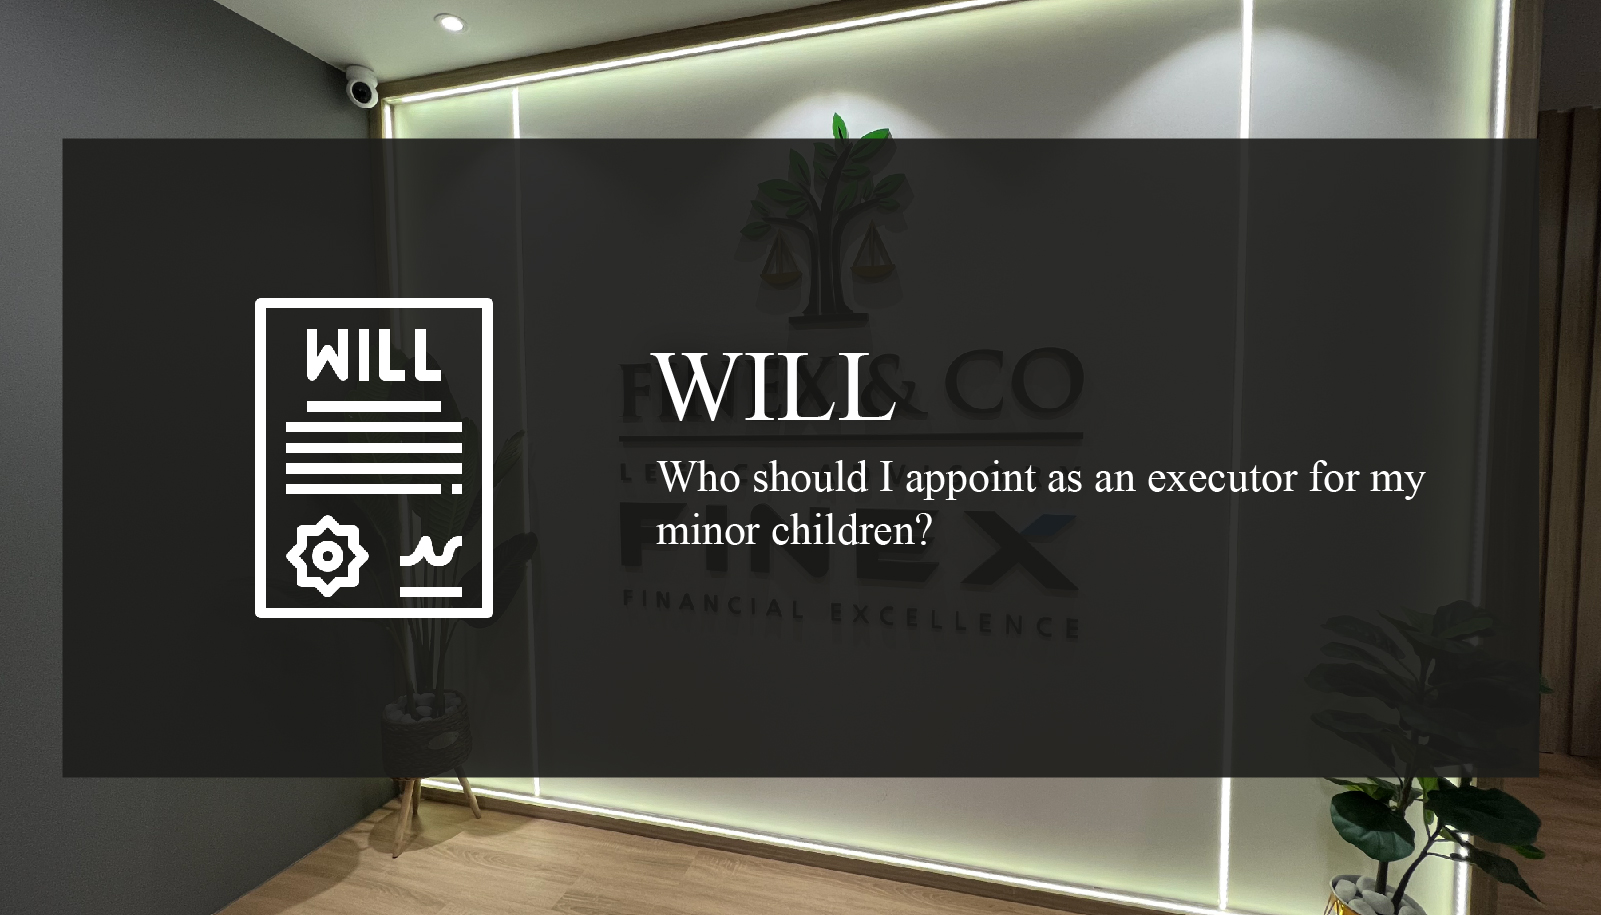 Who should I appoint as an executor for my minor children?